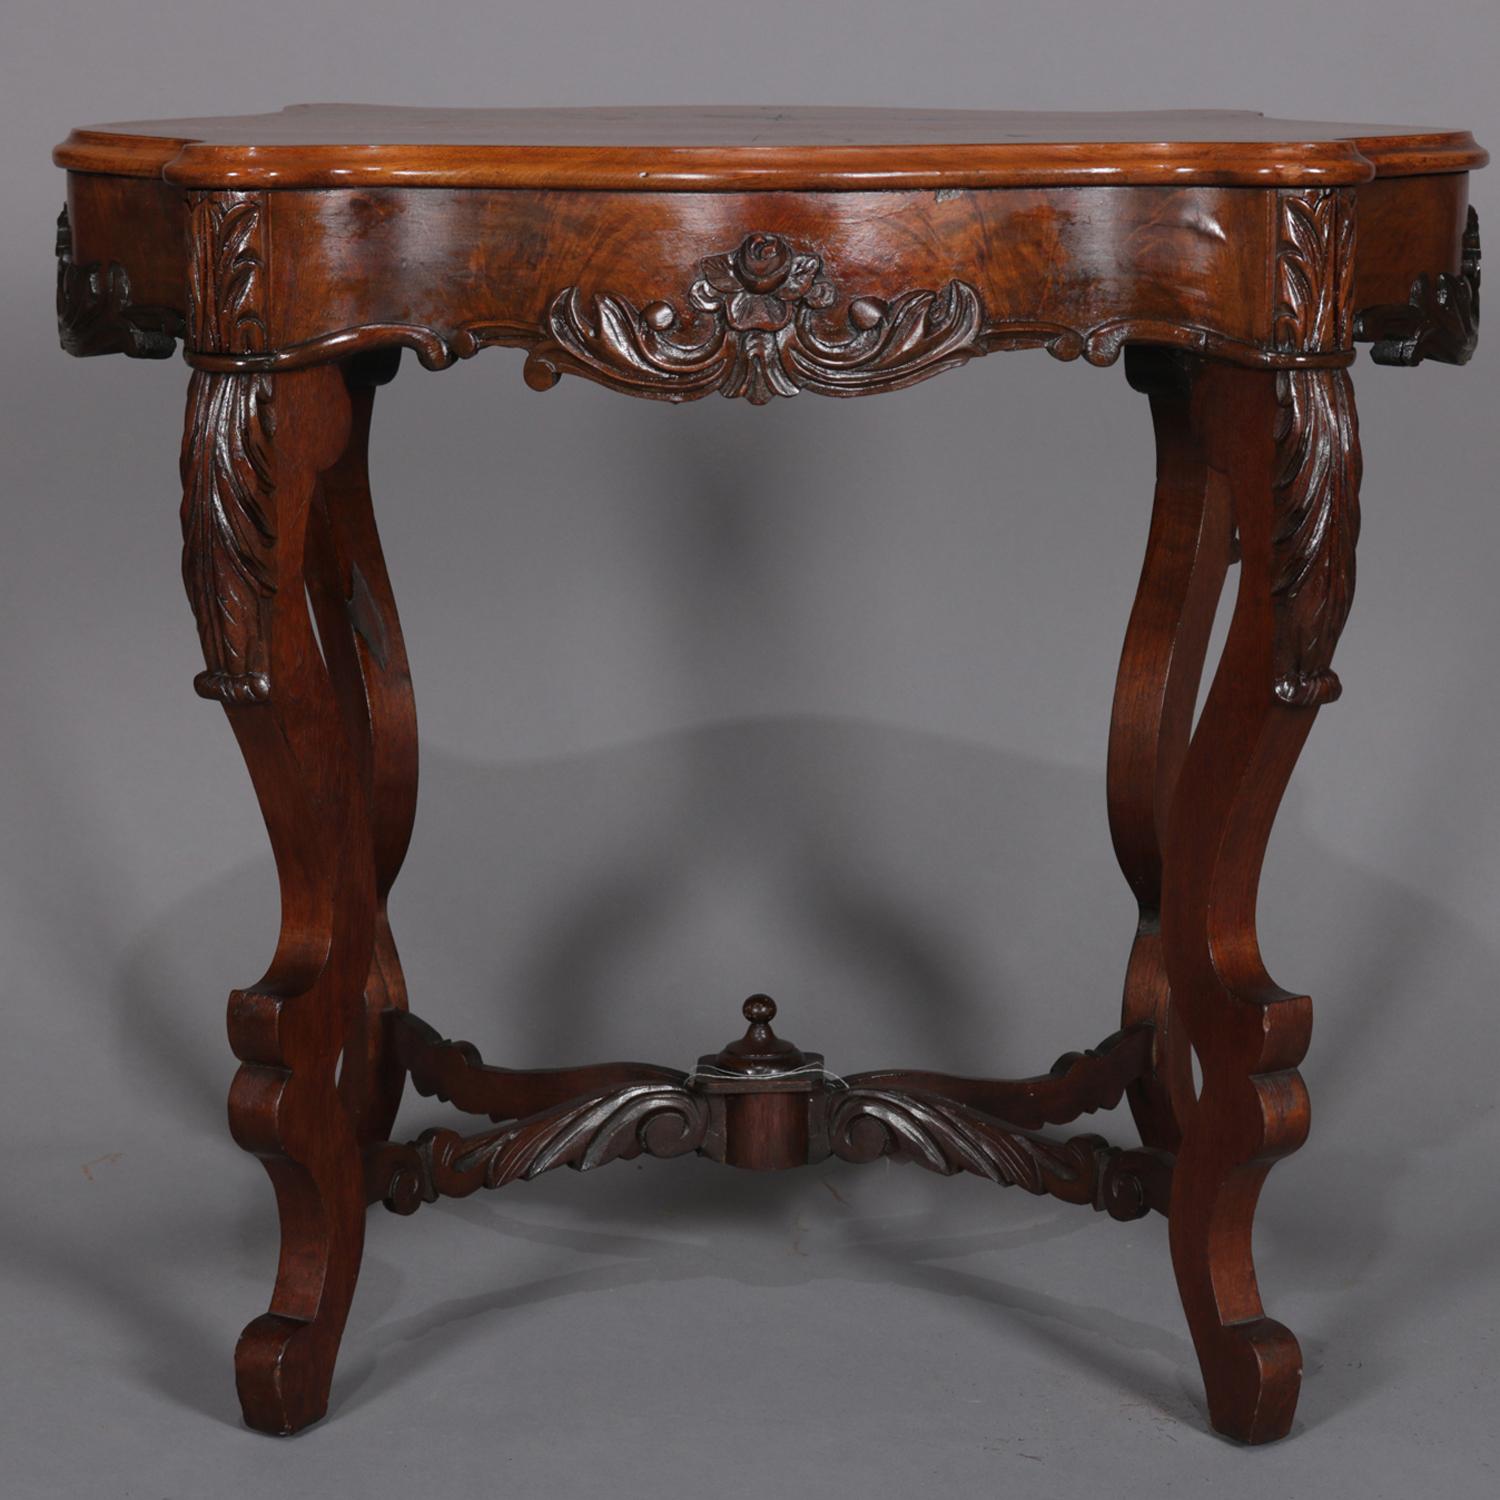 Antique center table features carved burl walnut construction with shaped and beveled top over scalloped skirt with central carved foliate and floral reserves raised on acanthus carved s-scroll legs surmounting c-scroll feet and having acanthus form